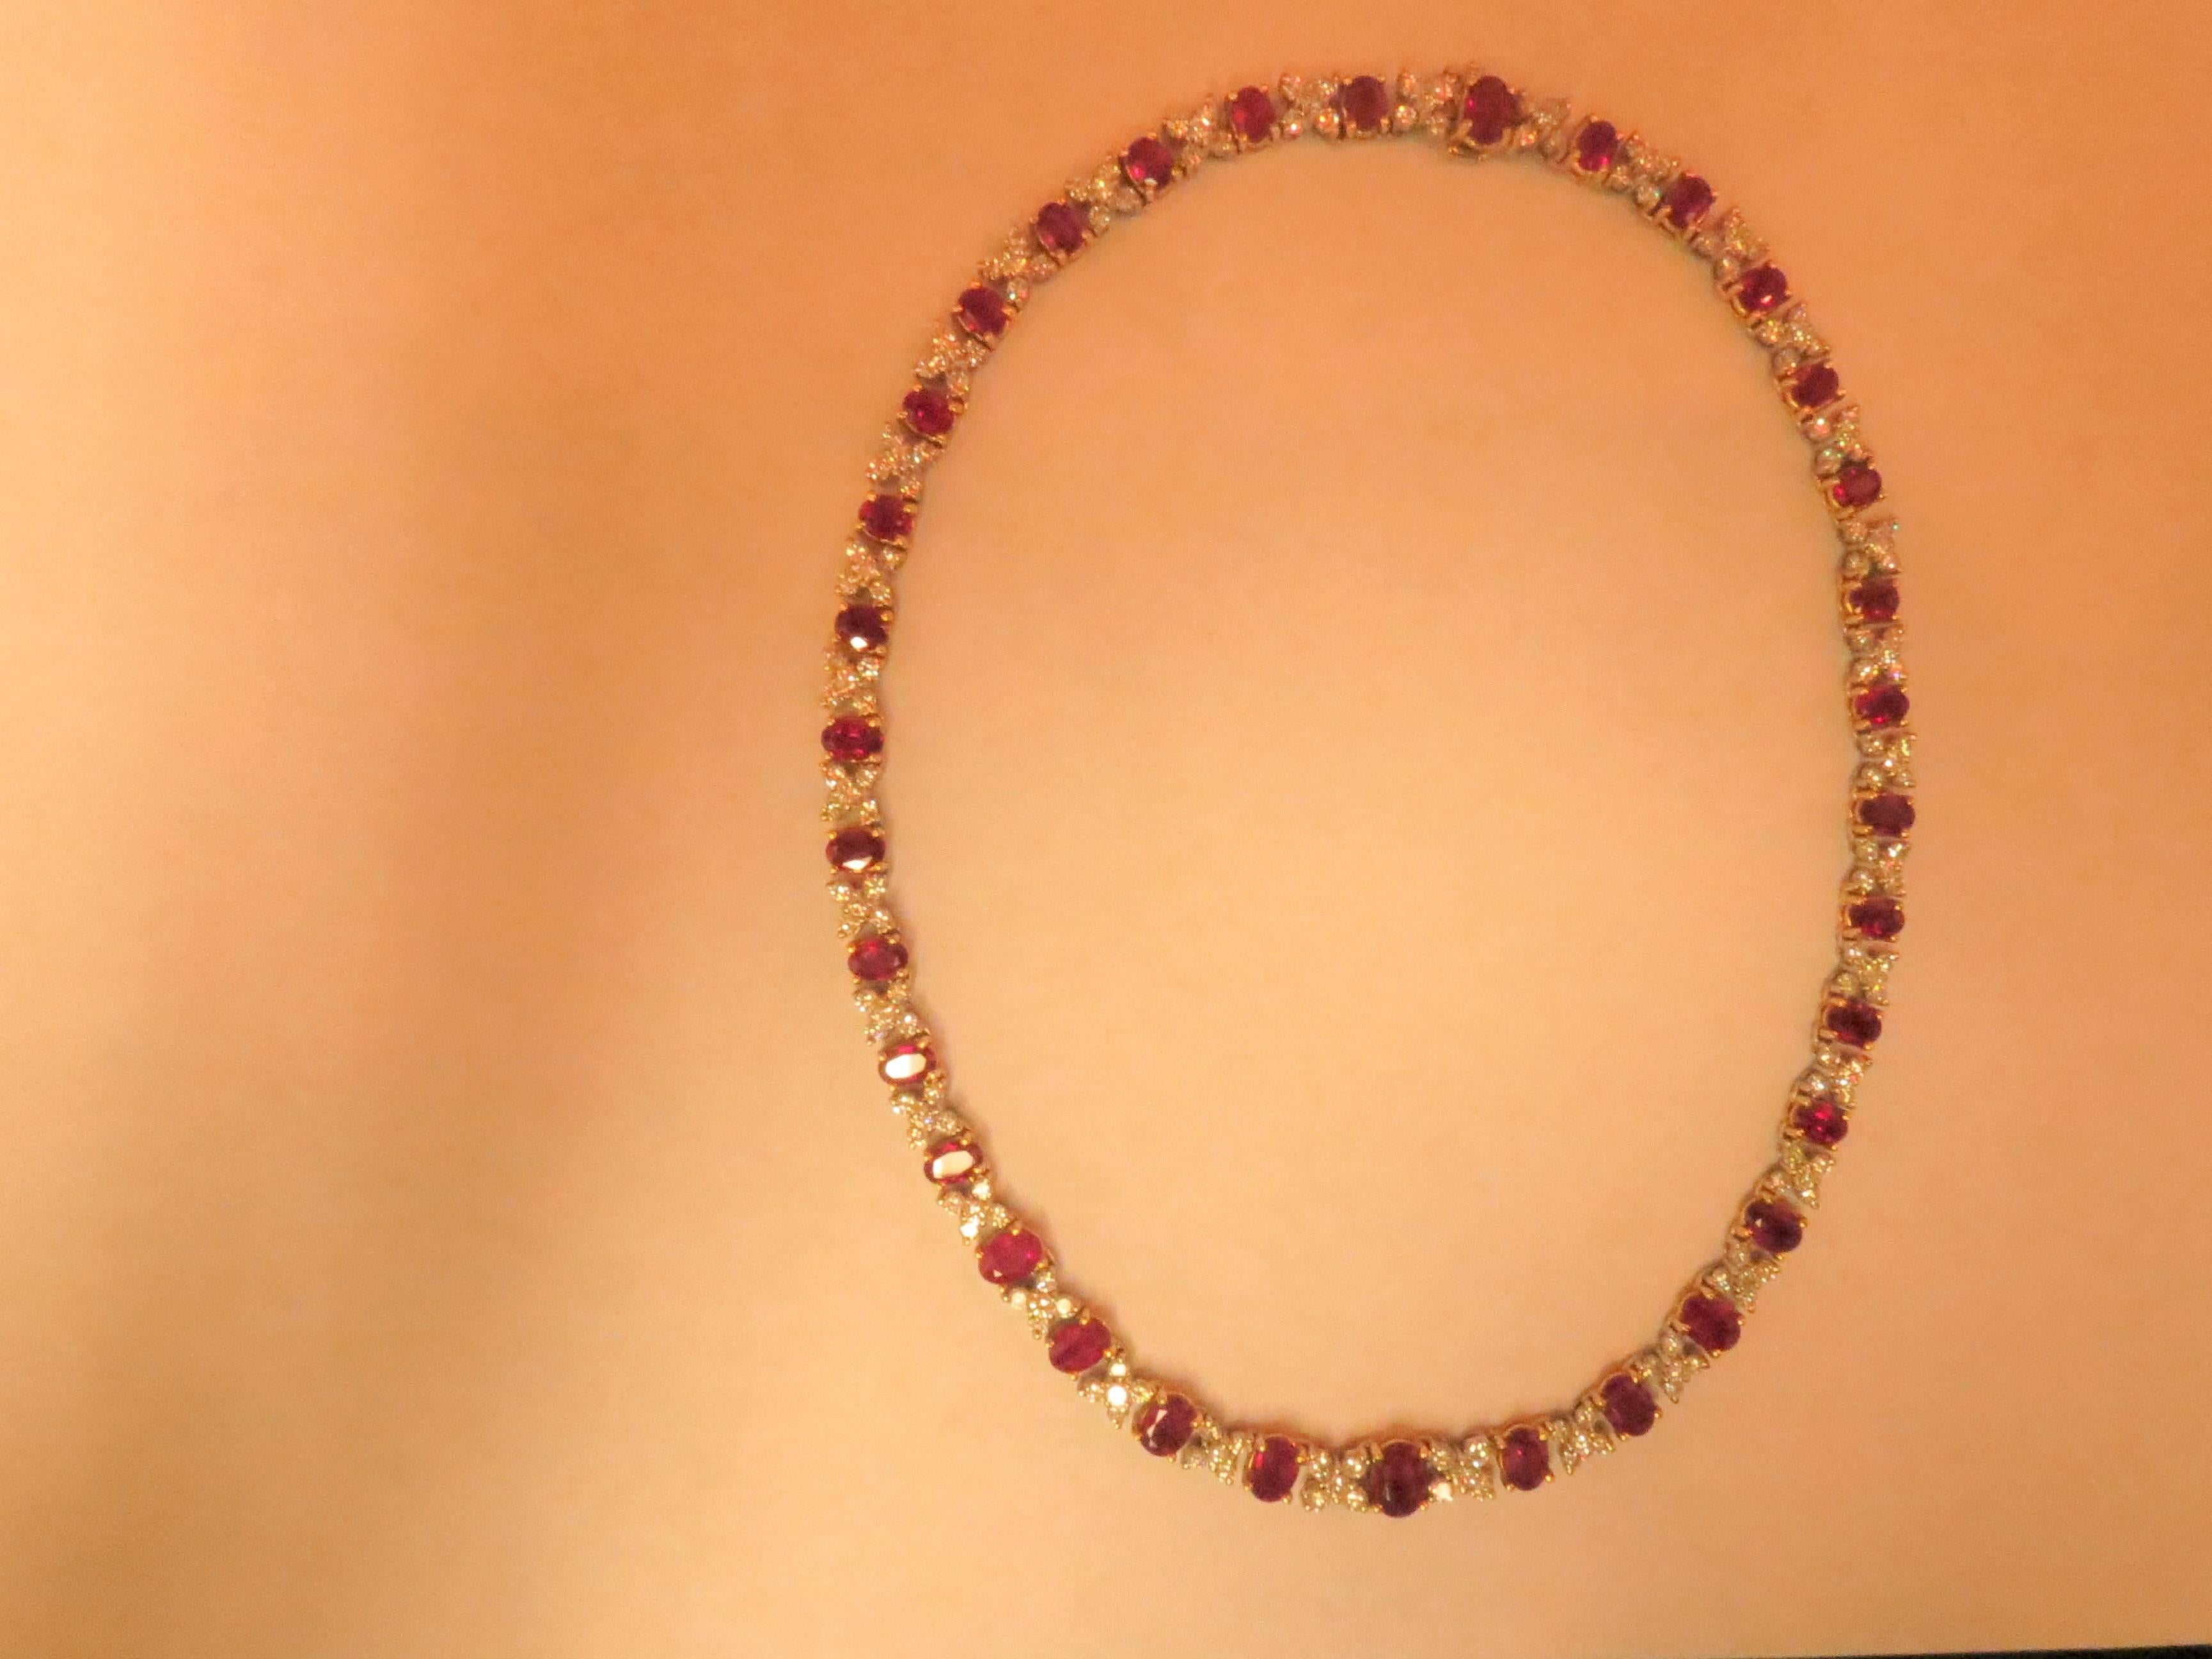 18K yellow and  white gold necklace set with 34 oval rubies weighing 20.96cts and 170 full cut round diamonds weighing 8.92ct, G-H color, VS clarity. Necklace tapers from 3/16 to 1/4 of an inch.